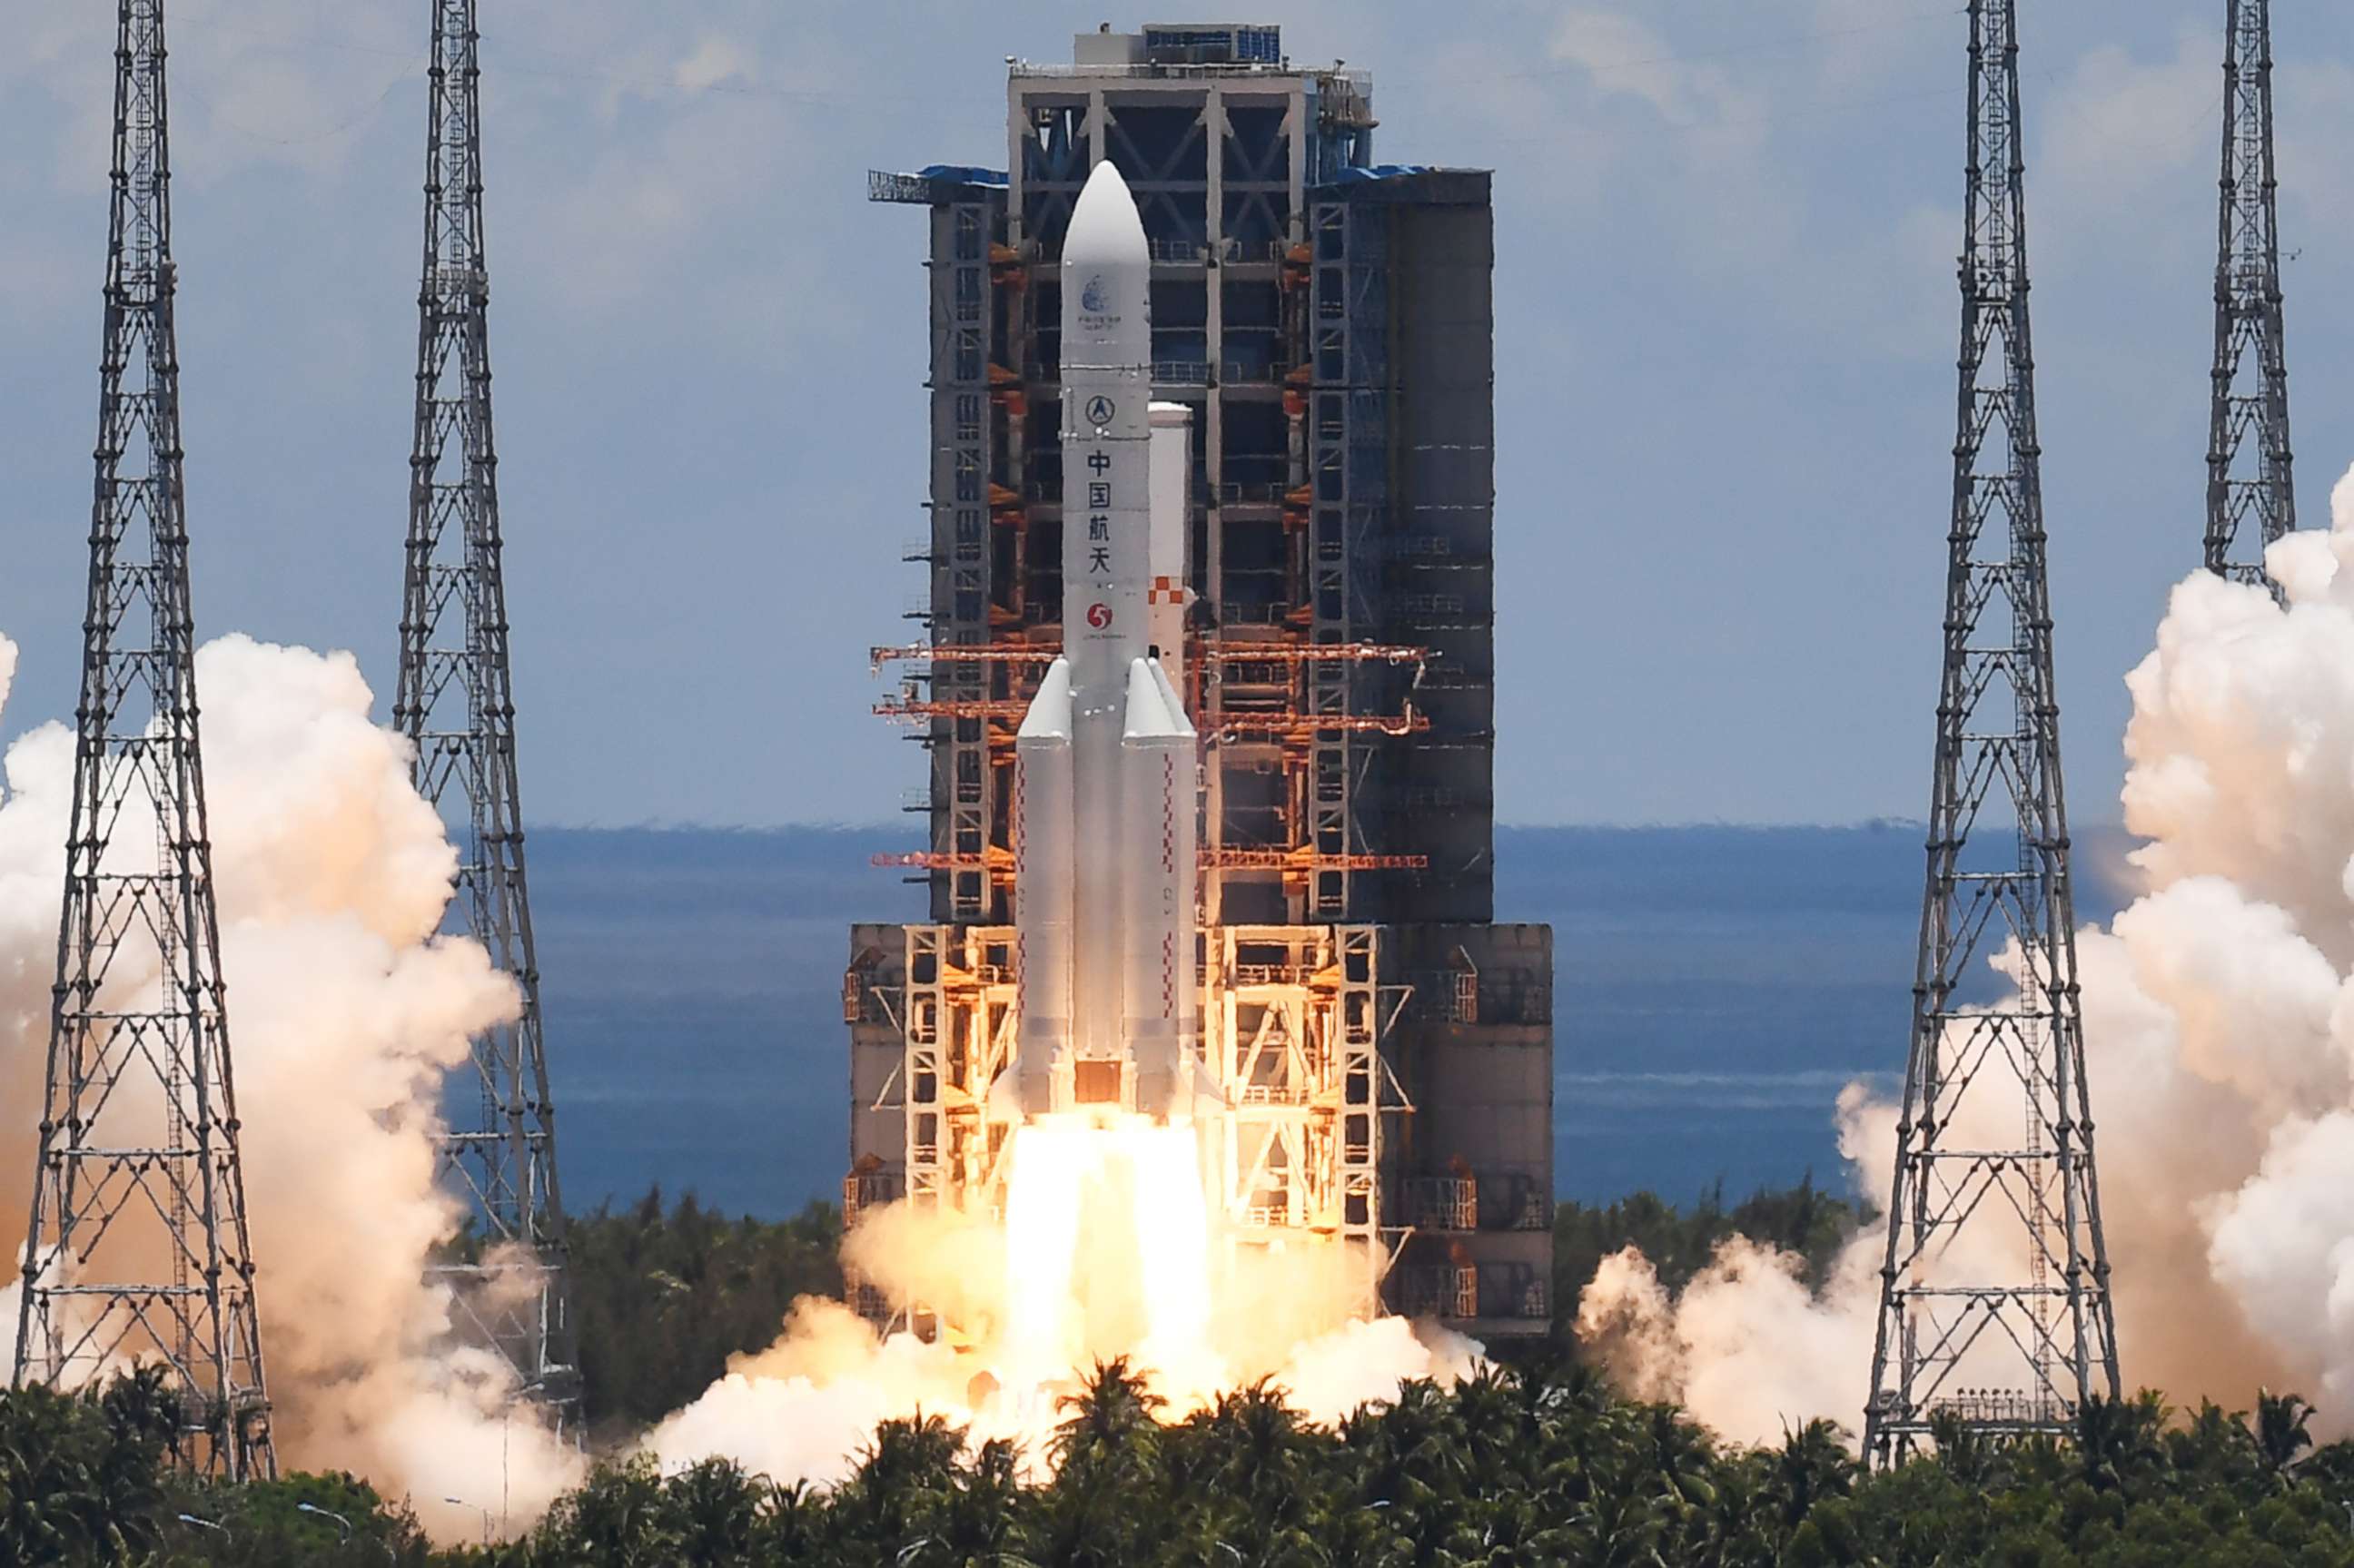 PHOTO: A Long March-5 rocket, carrying an orbiter, lander and rover as part of the Tianwen-1 mission to Mars, lifts off from the Wenchang Space Launch Center in southern China's Hainan Province on July 23, 2020.